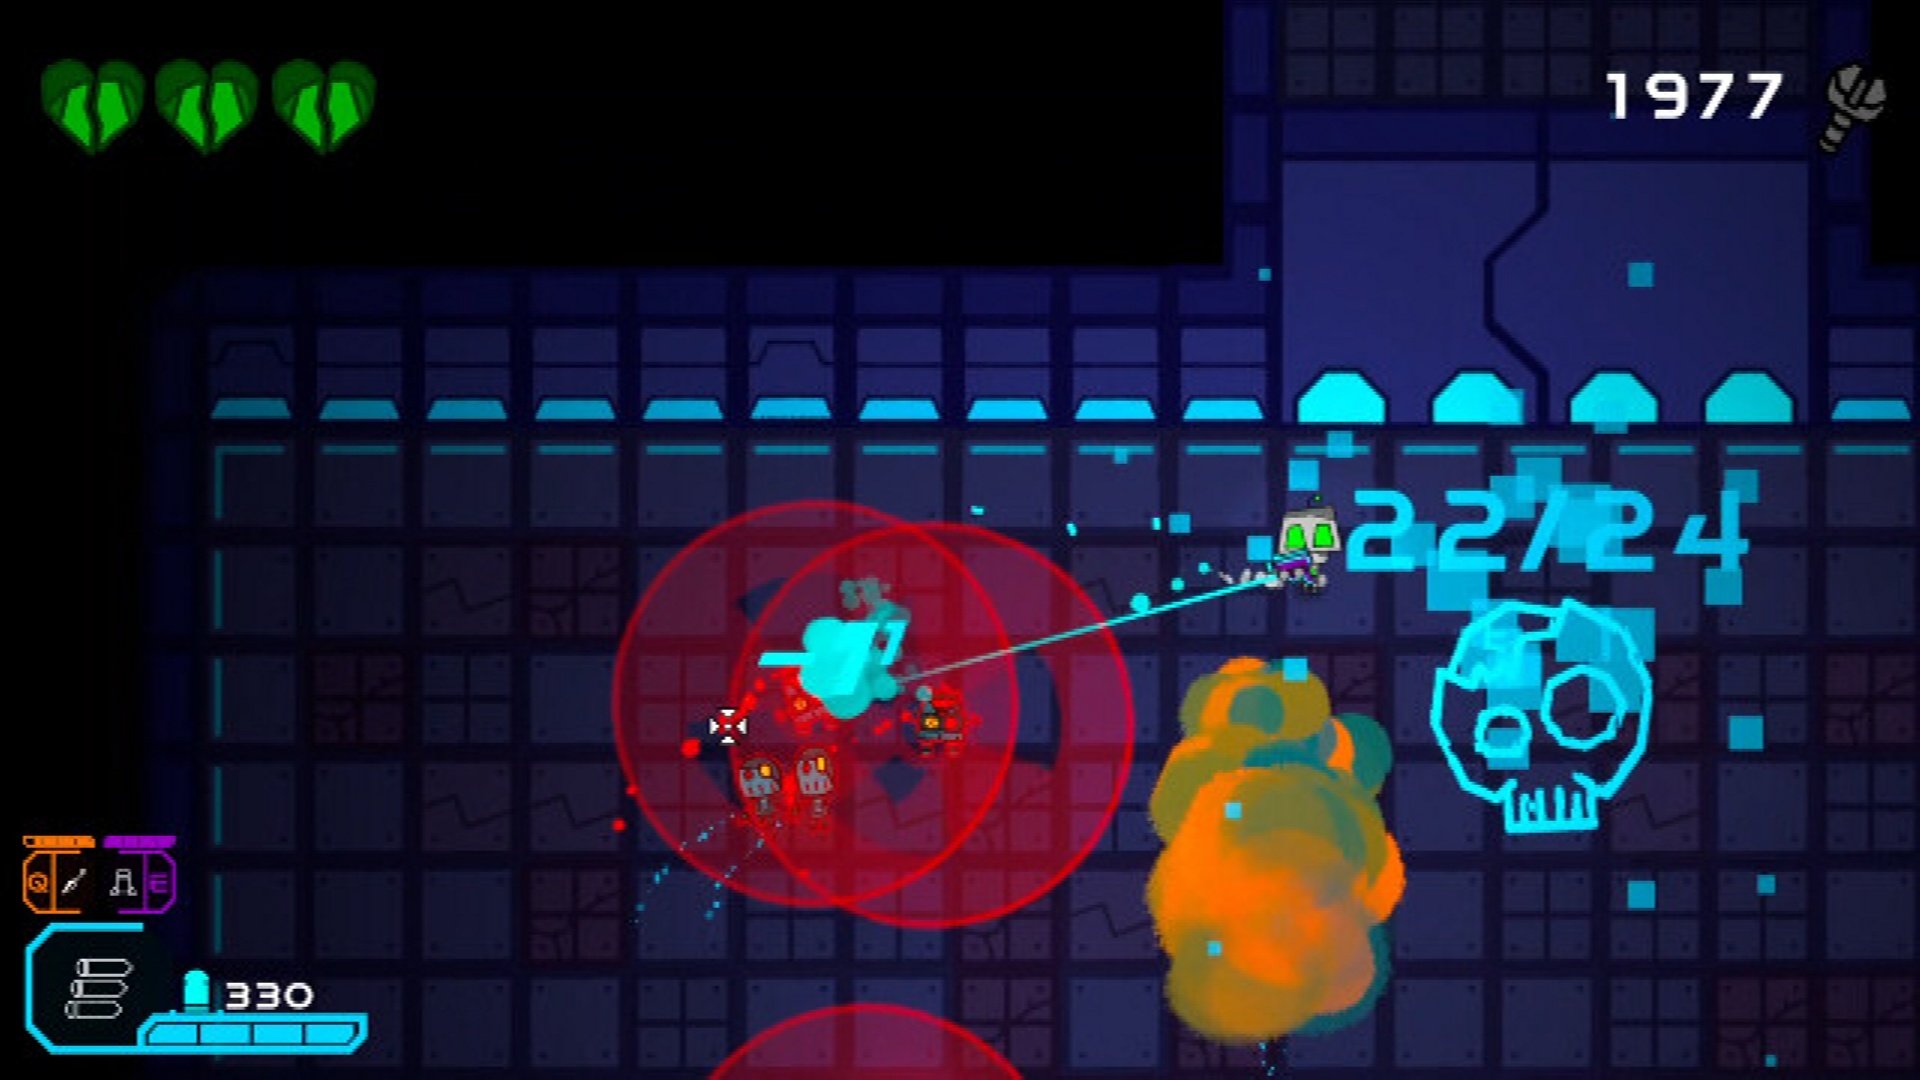 metal characters shooting at each other. Image is from game Deadlocked.